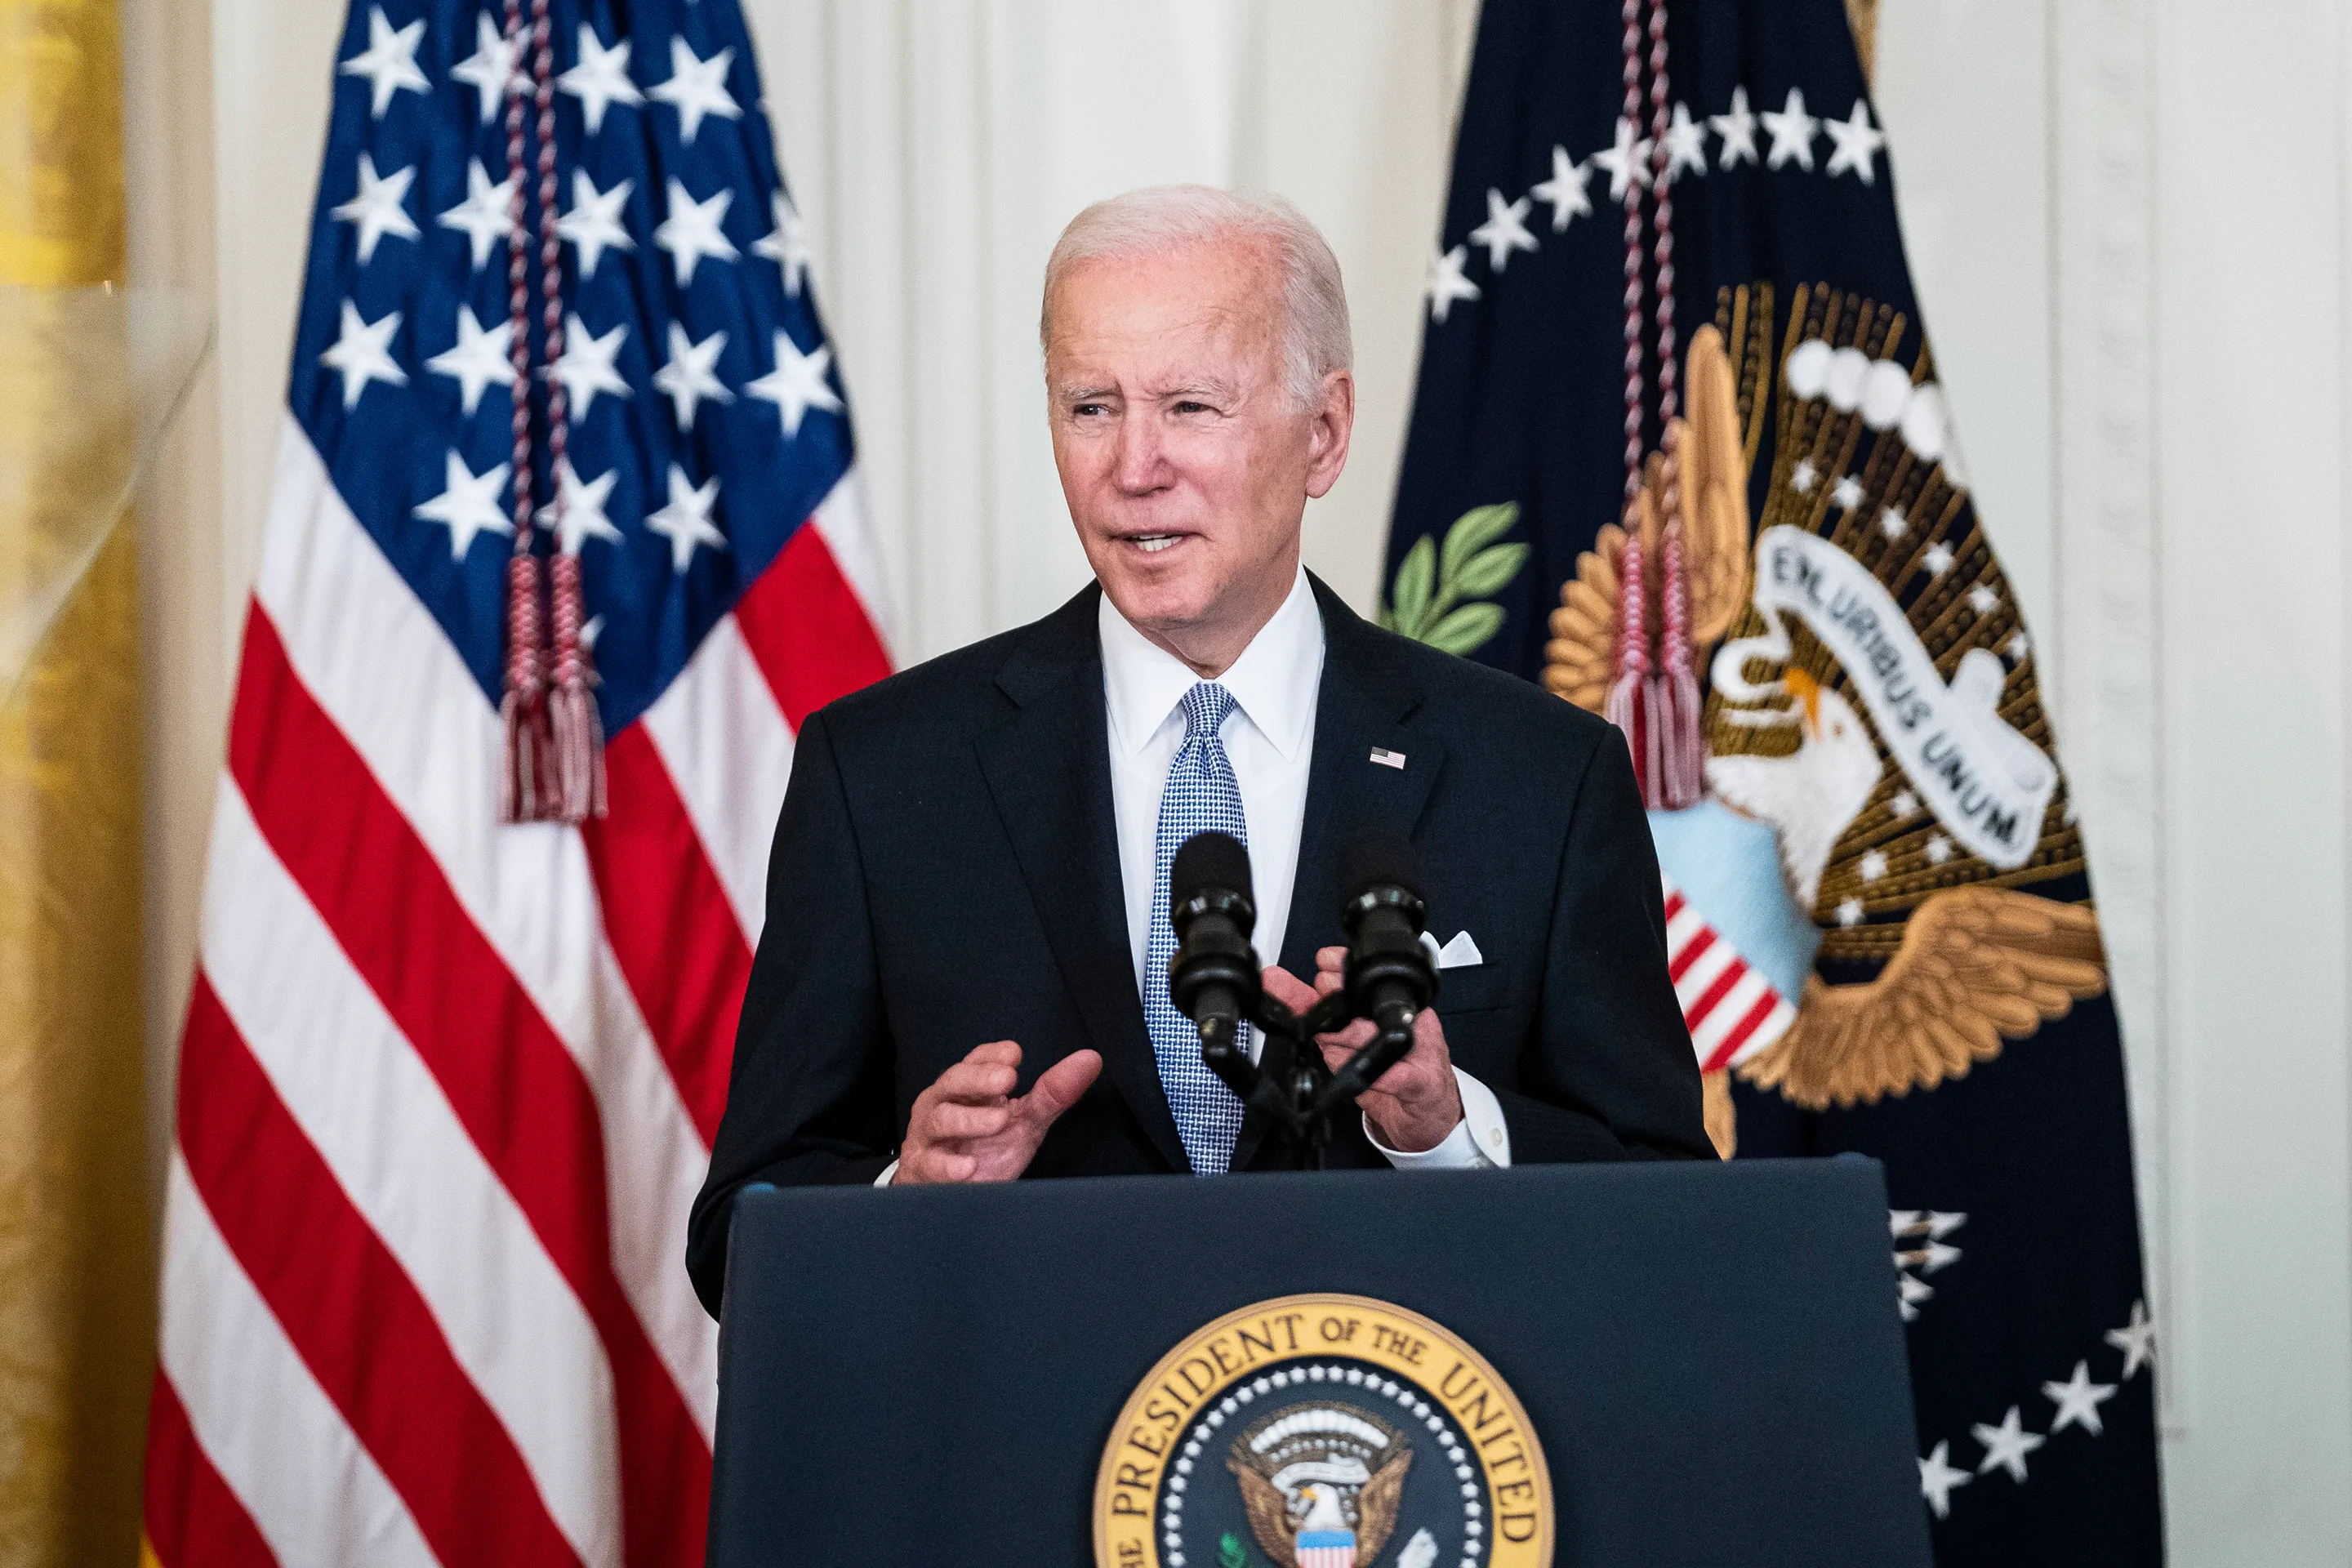 'Top Economic Challenge Right Now': How Biden Plans on Fighting Inflation